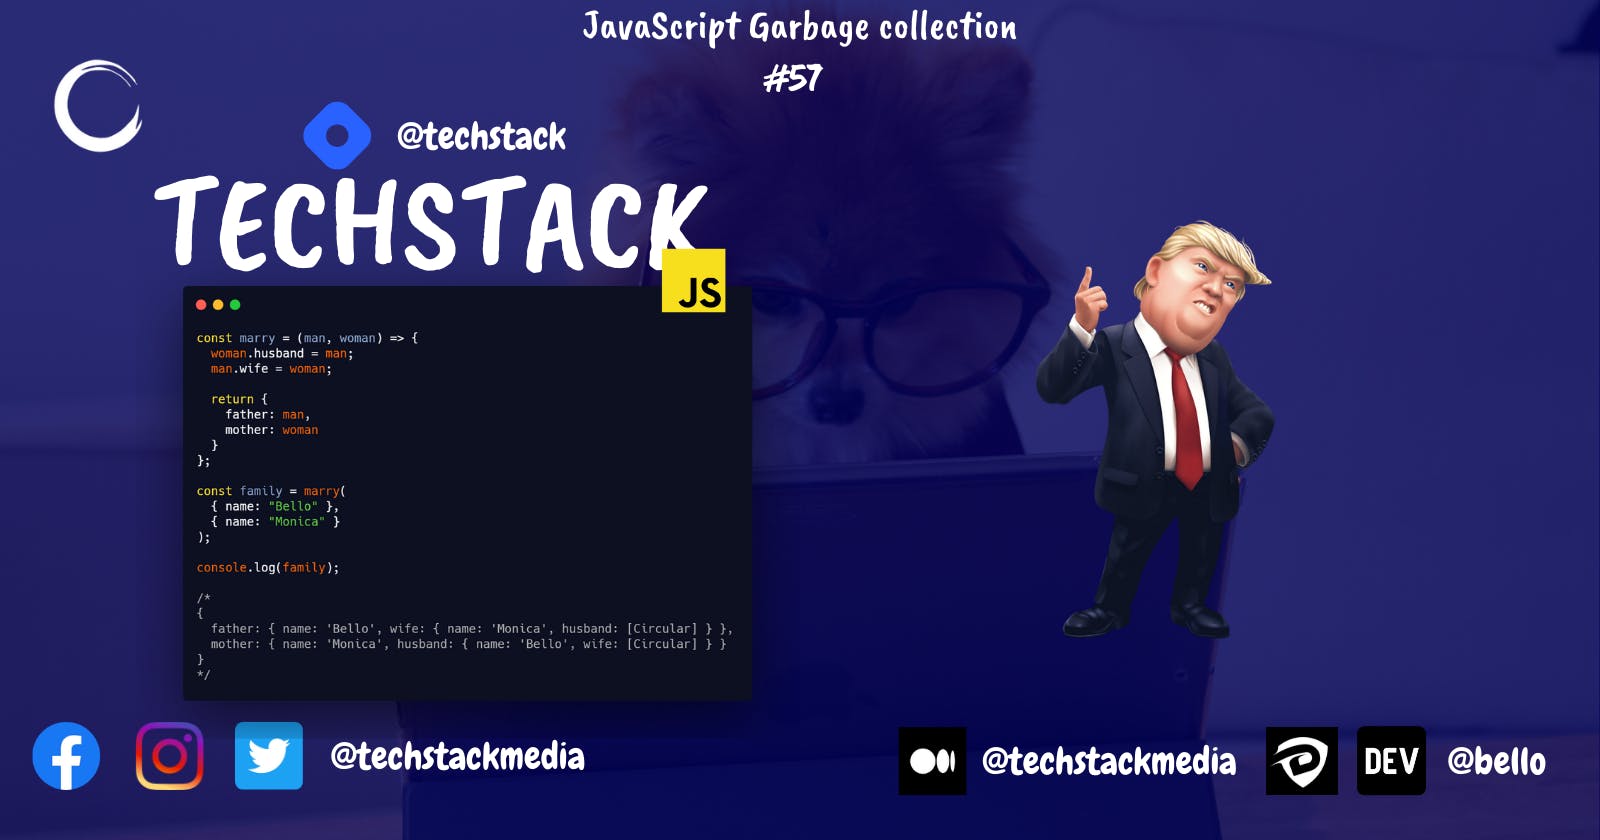 JavaScript Garbage collection